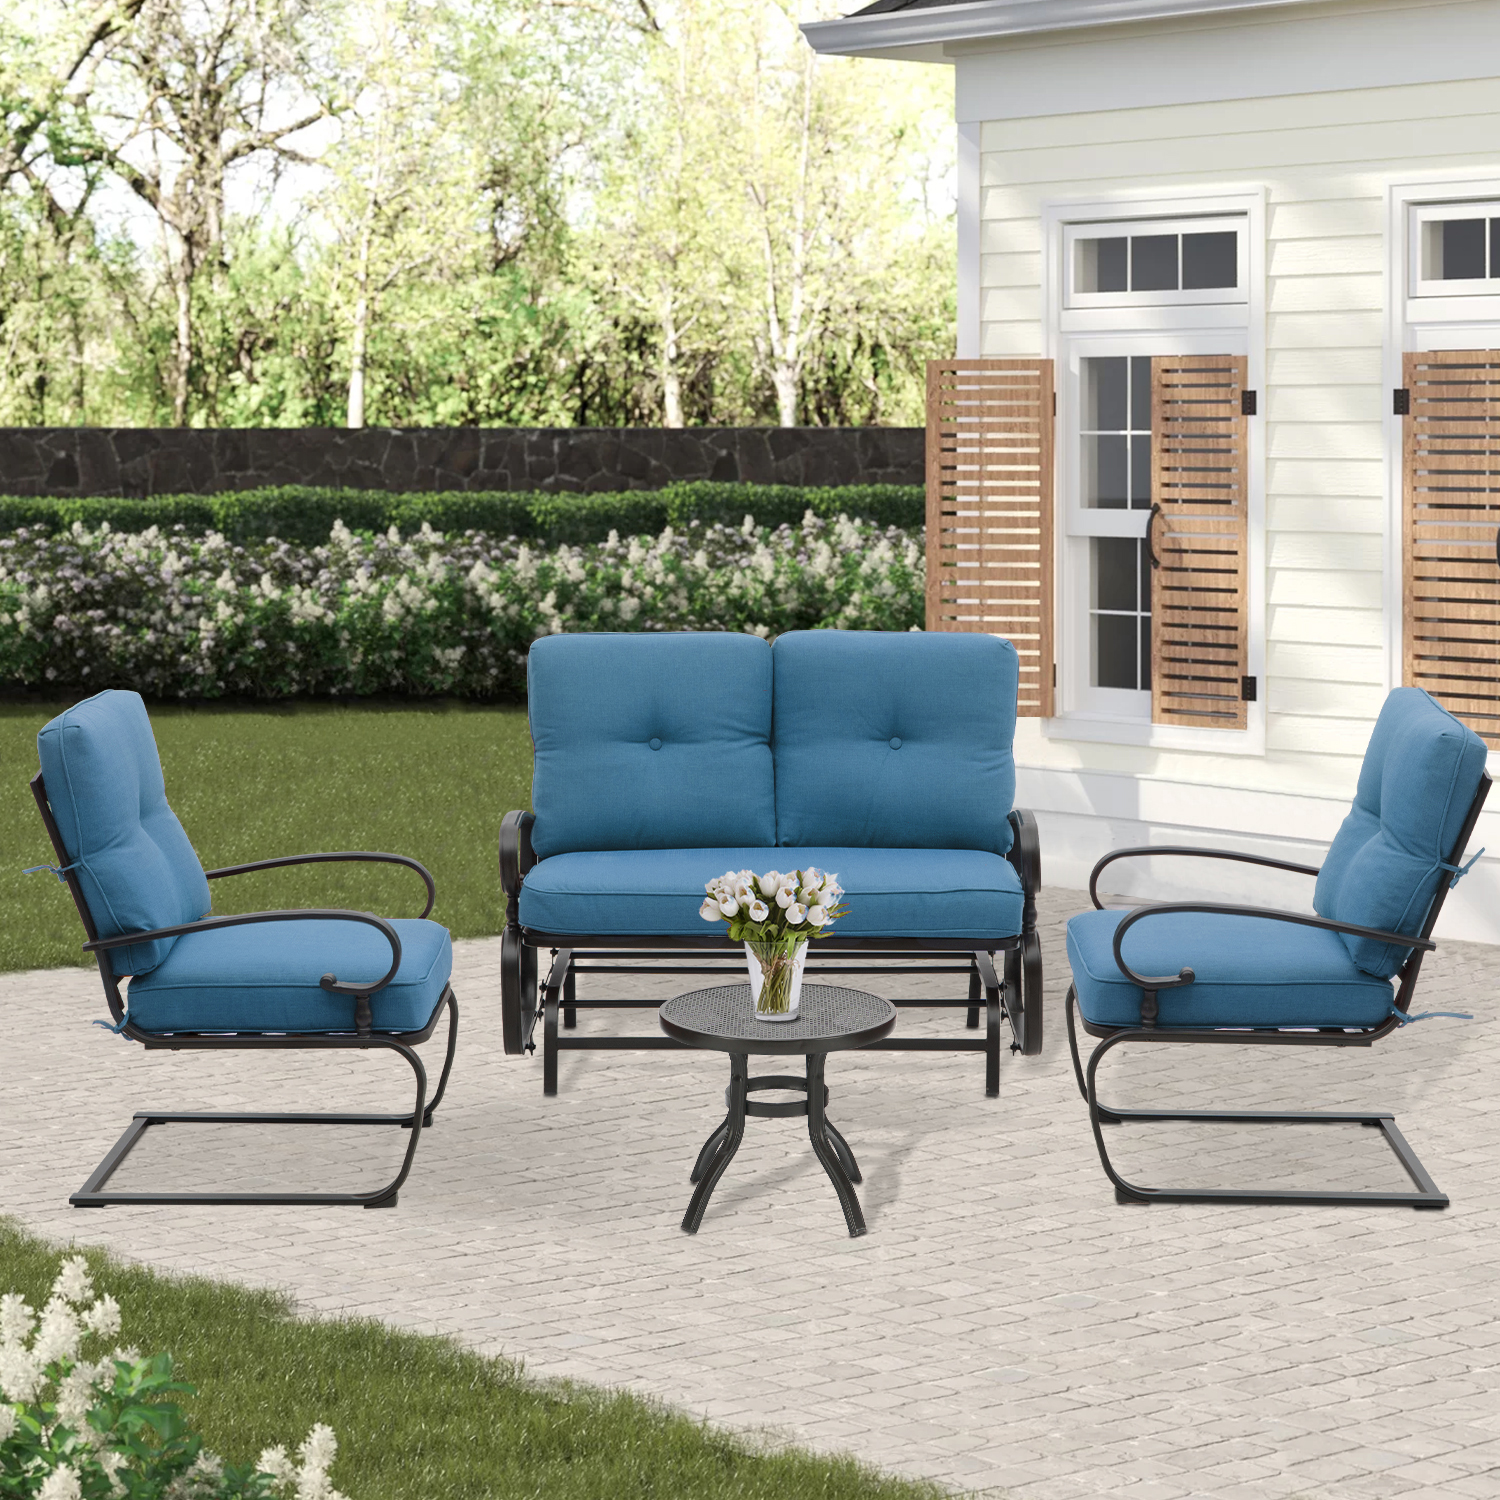 SUNCROWN 4-Piece Outdoor Patio Furniture Set Wrought Iron Conversation Sets, Peacock Blue - image 1 of 8